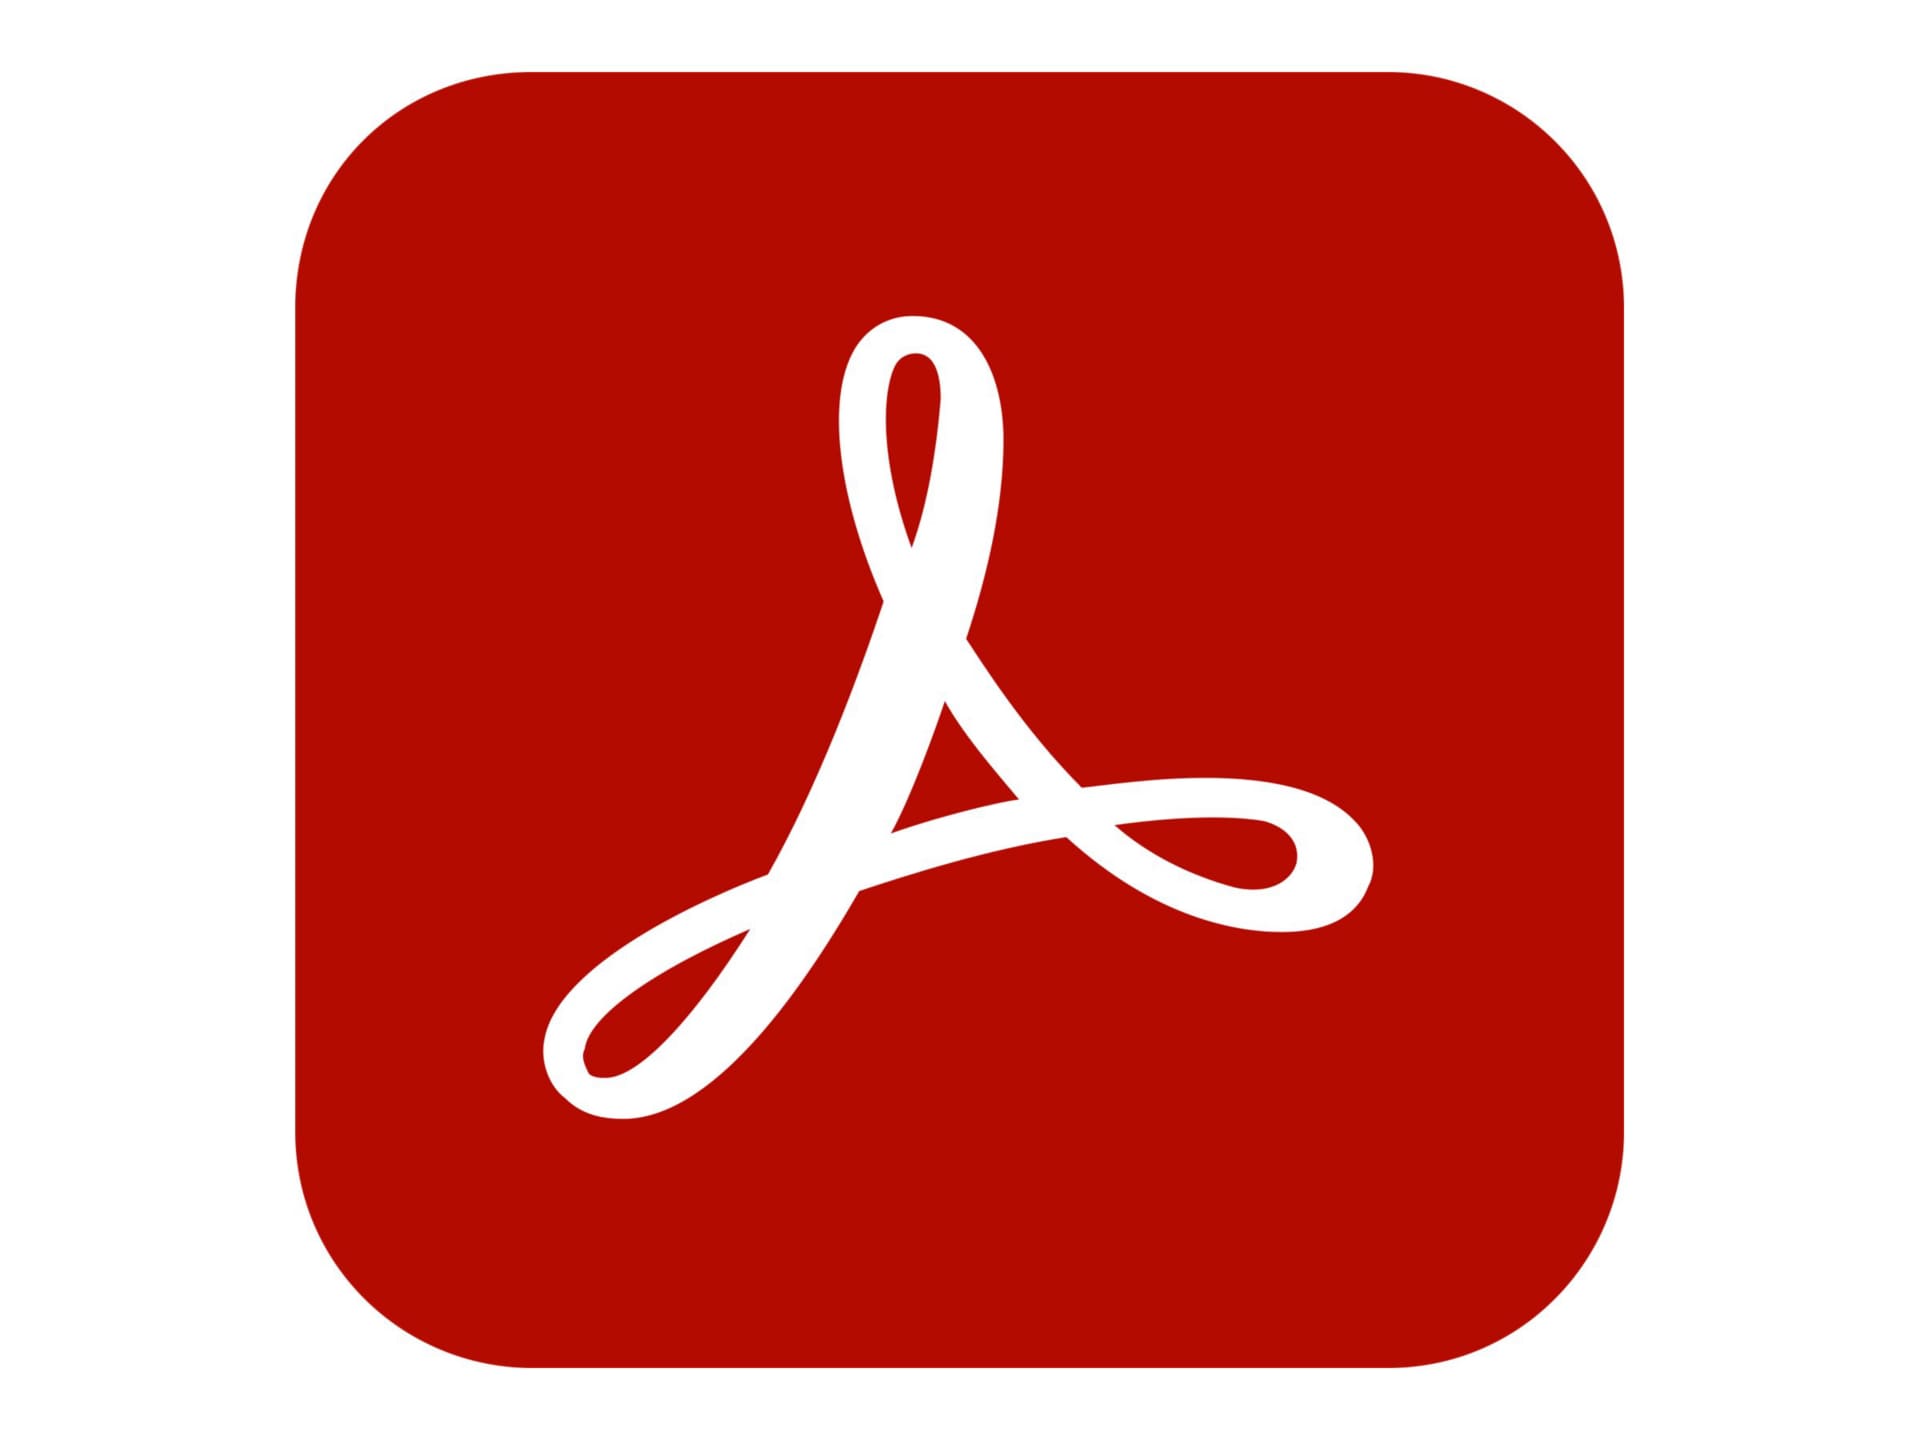 Adobe Acrobat Pro DC for teams - Subscription New (3 years) - 1 named user  - 65297999BB01A36 - Document Management 